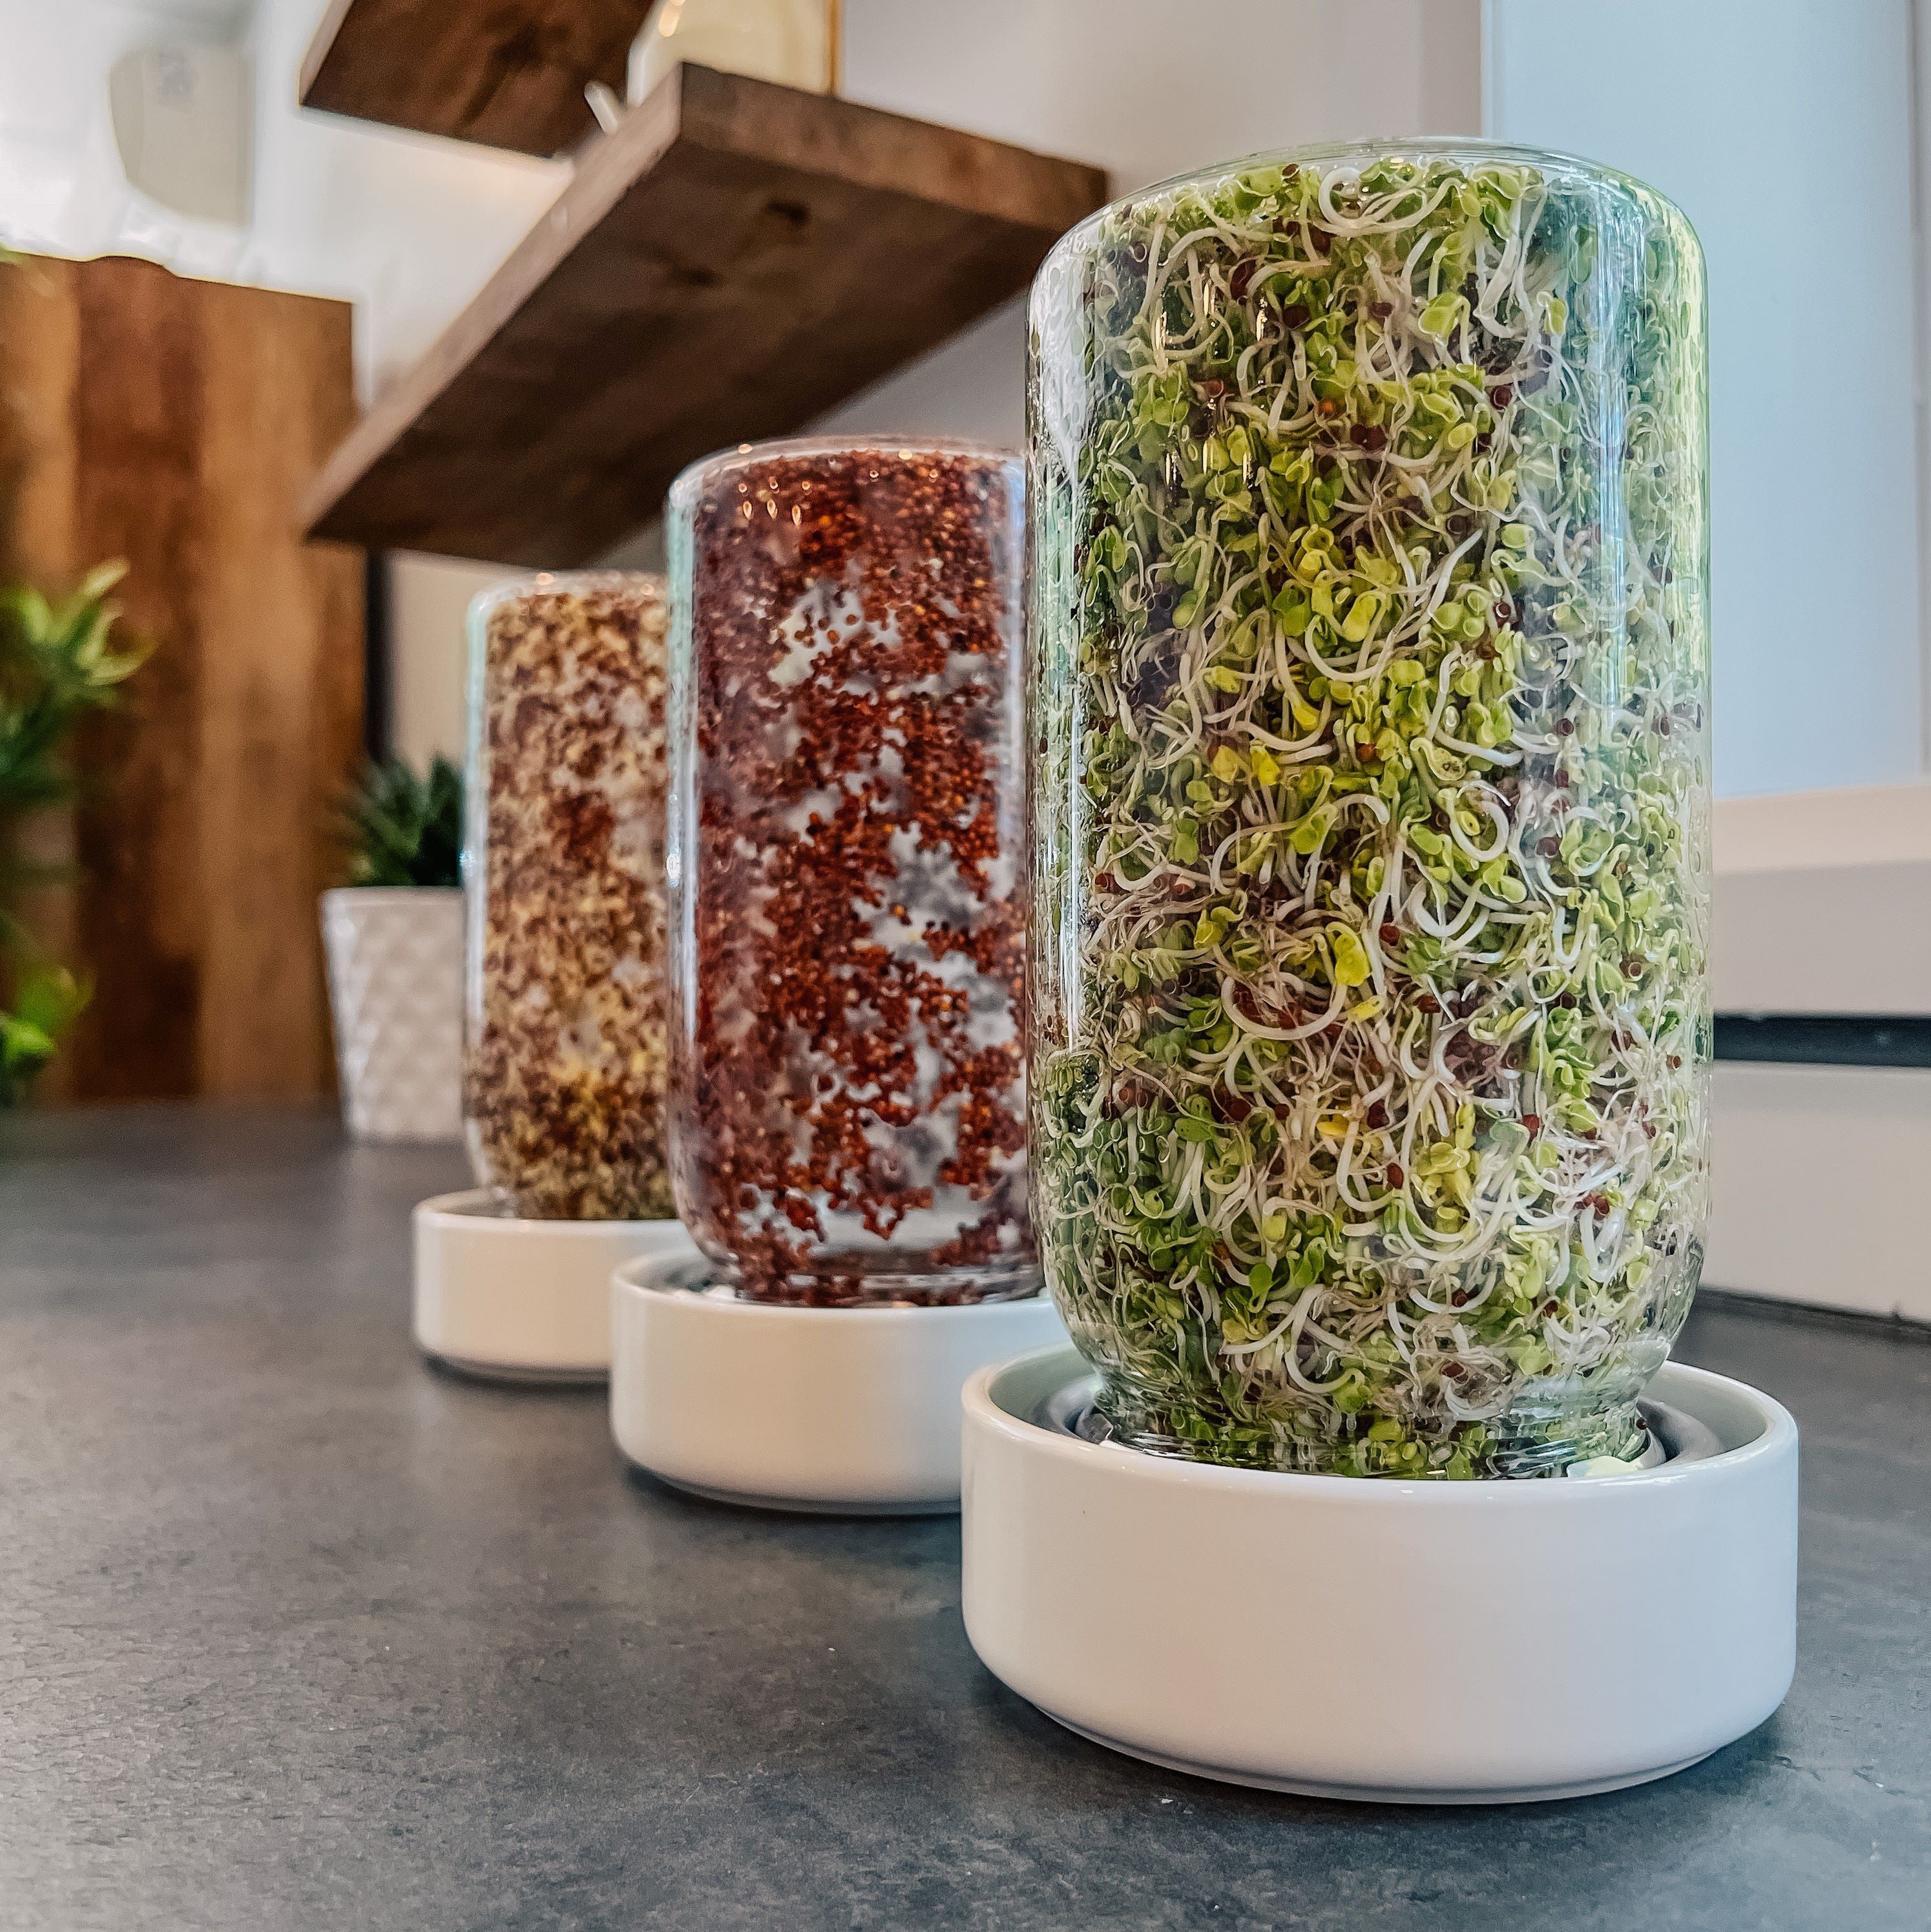 Three Sprout Jar Kits on a kitchen counter with broccoli sprouts at different stages of growth